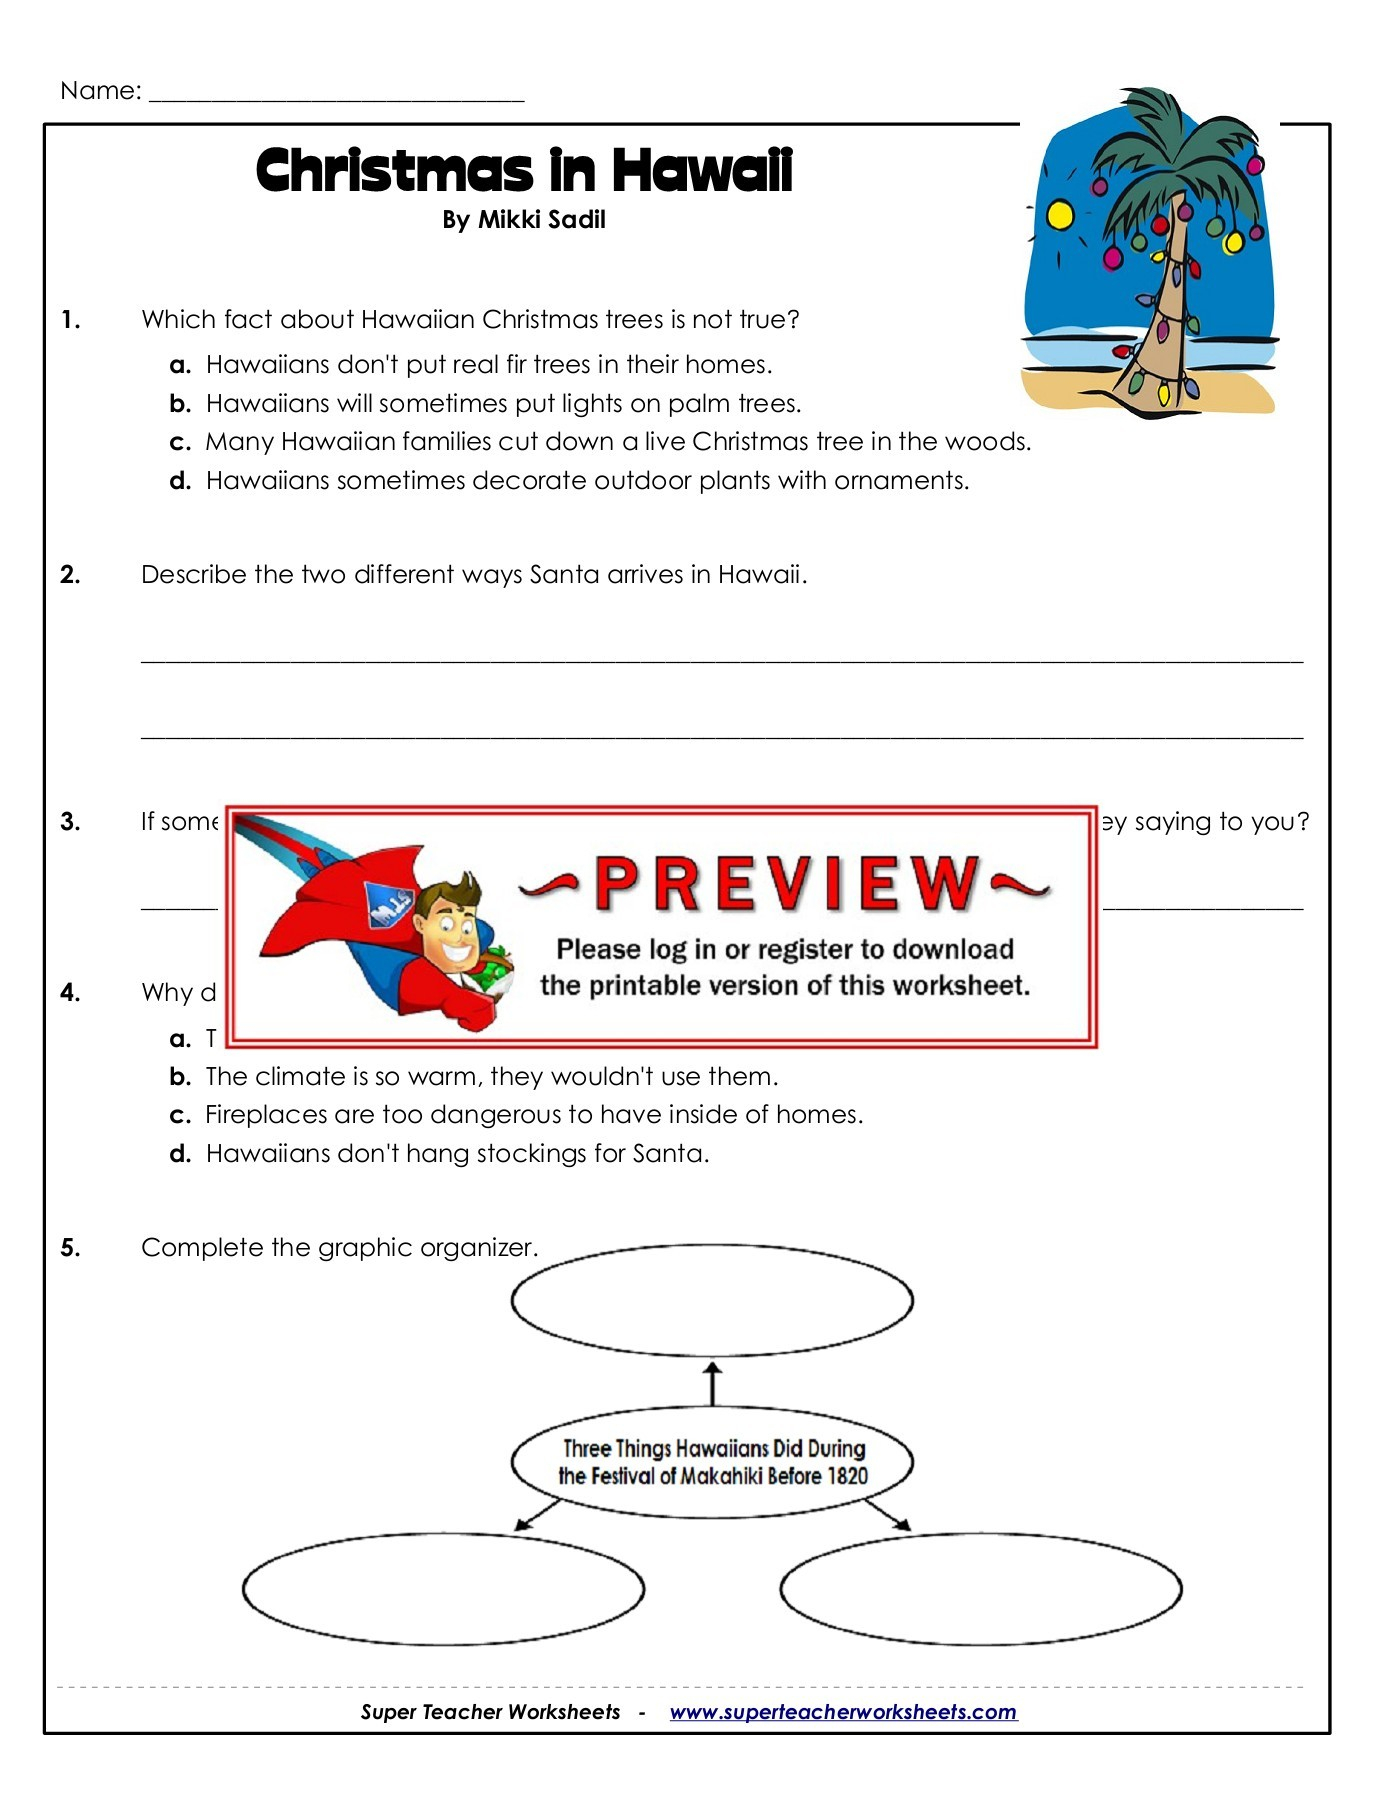 Christmas In Hawaii - Super Teacher Worksheets Pages 1 - 7